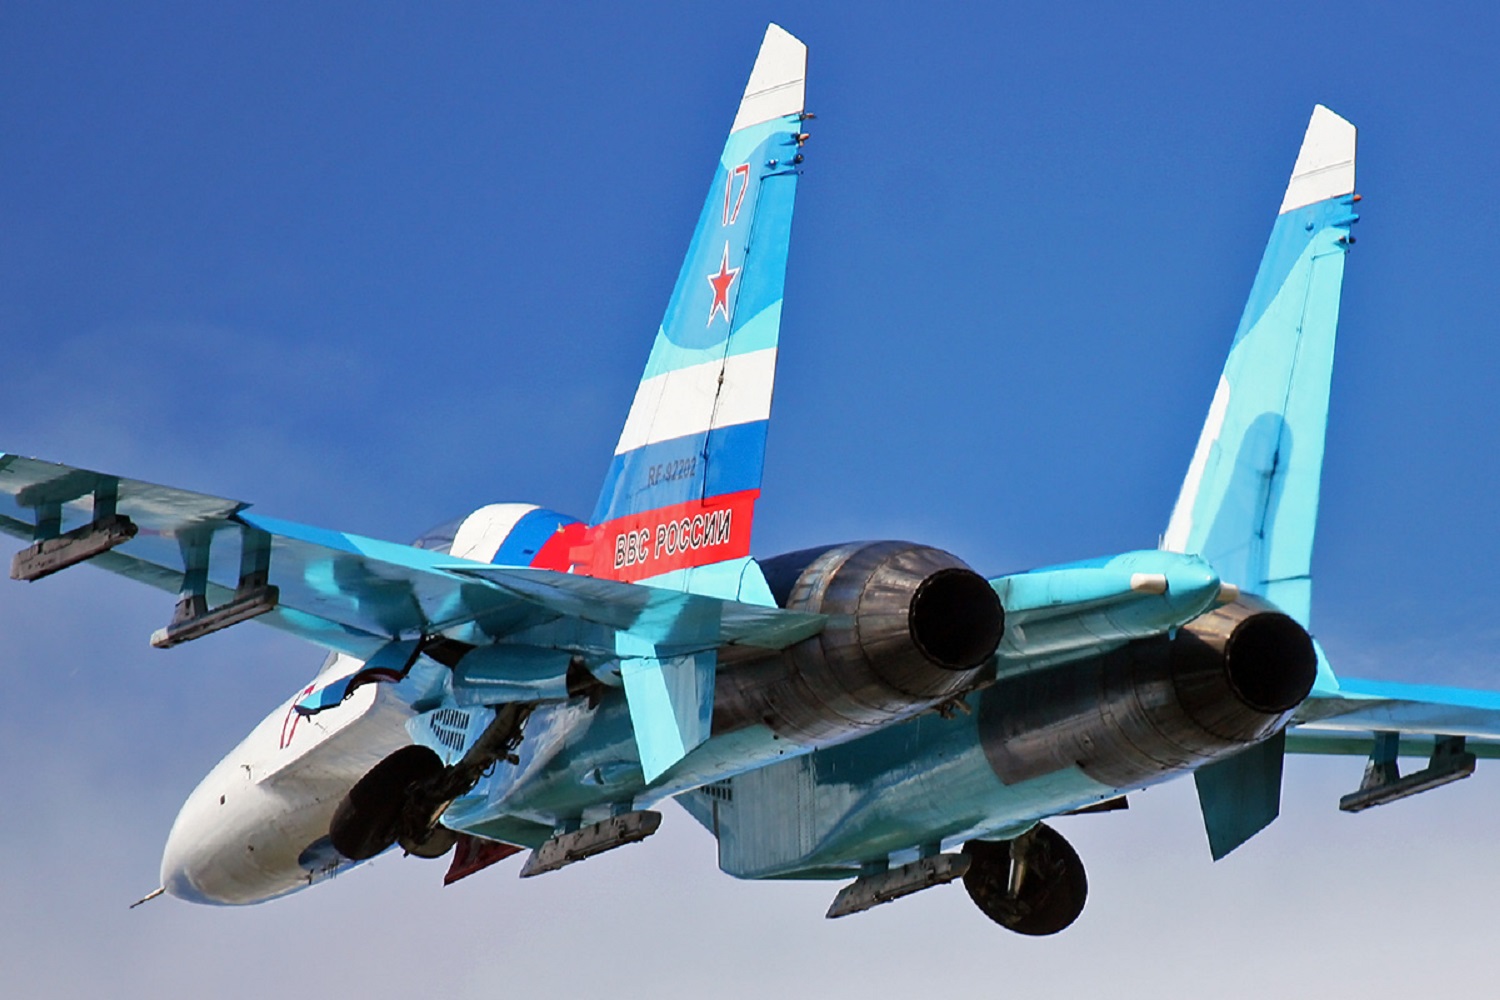 Russia's F-15 Killer: Why America (and the World) Fears the Su-27